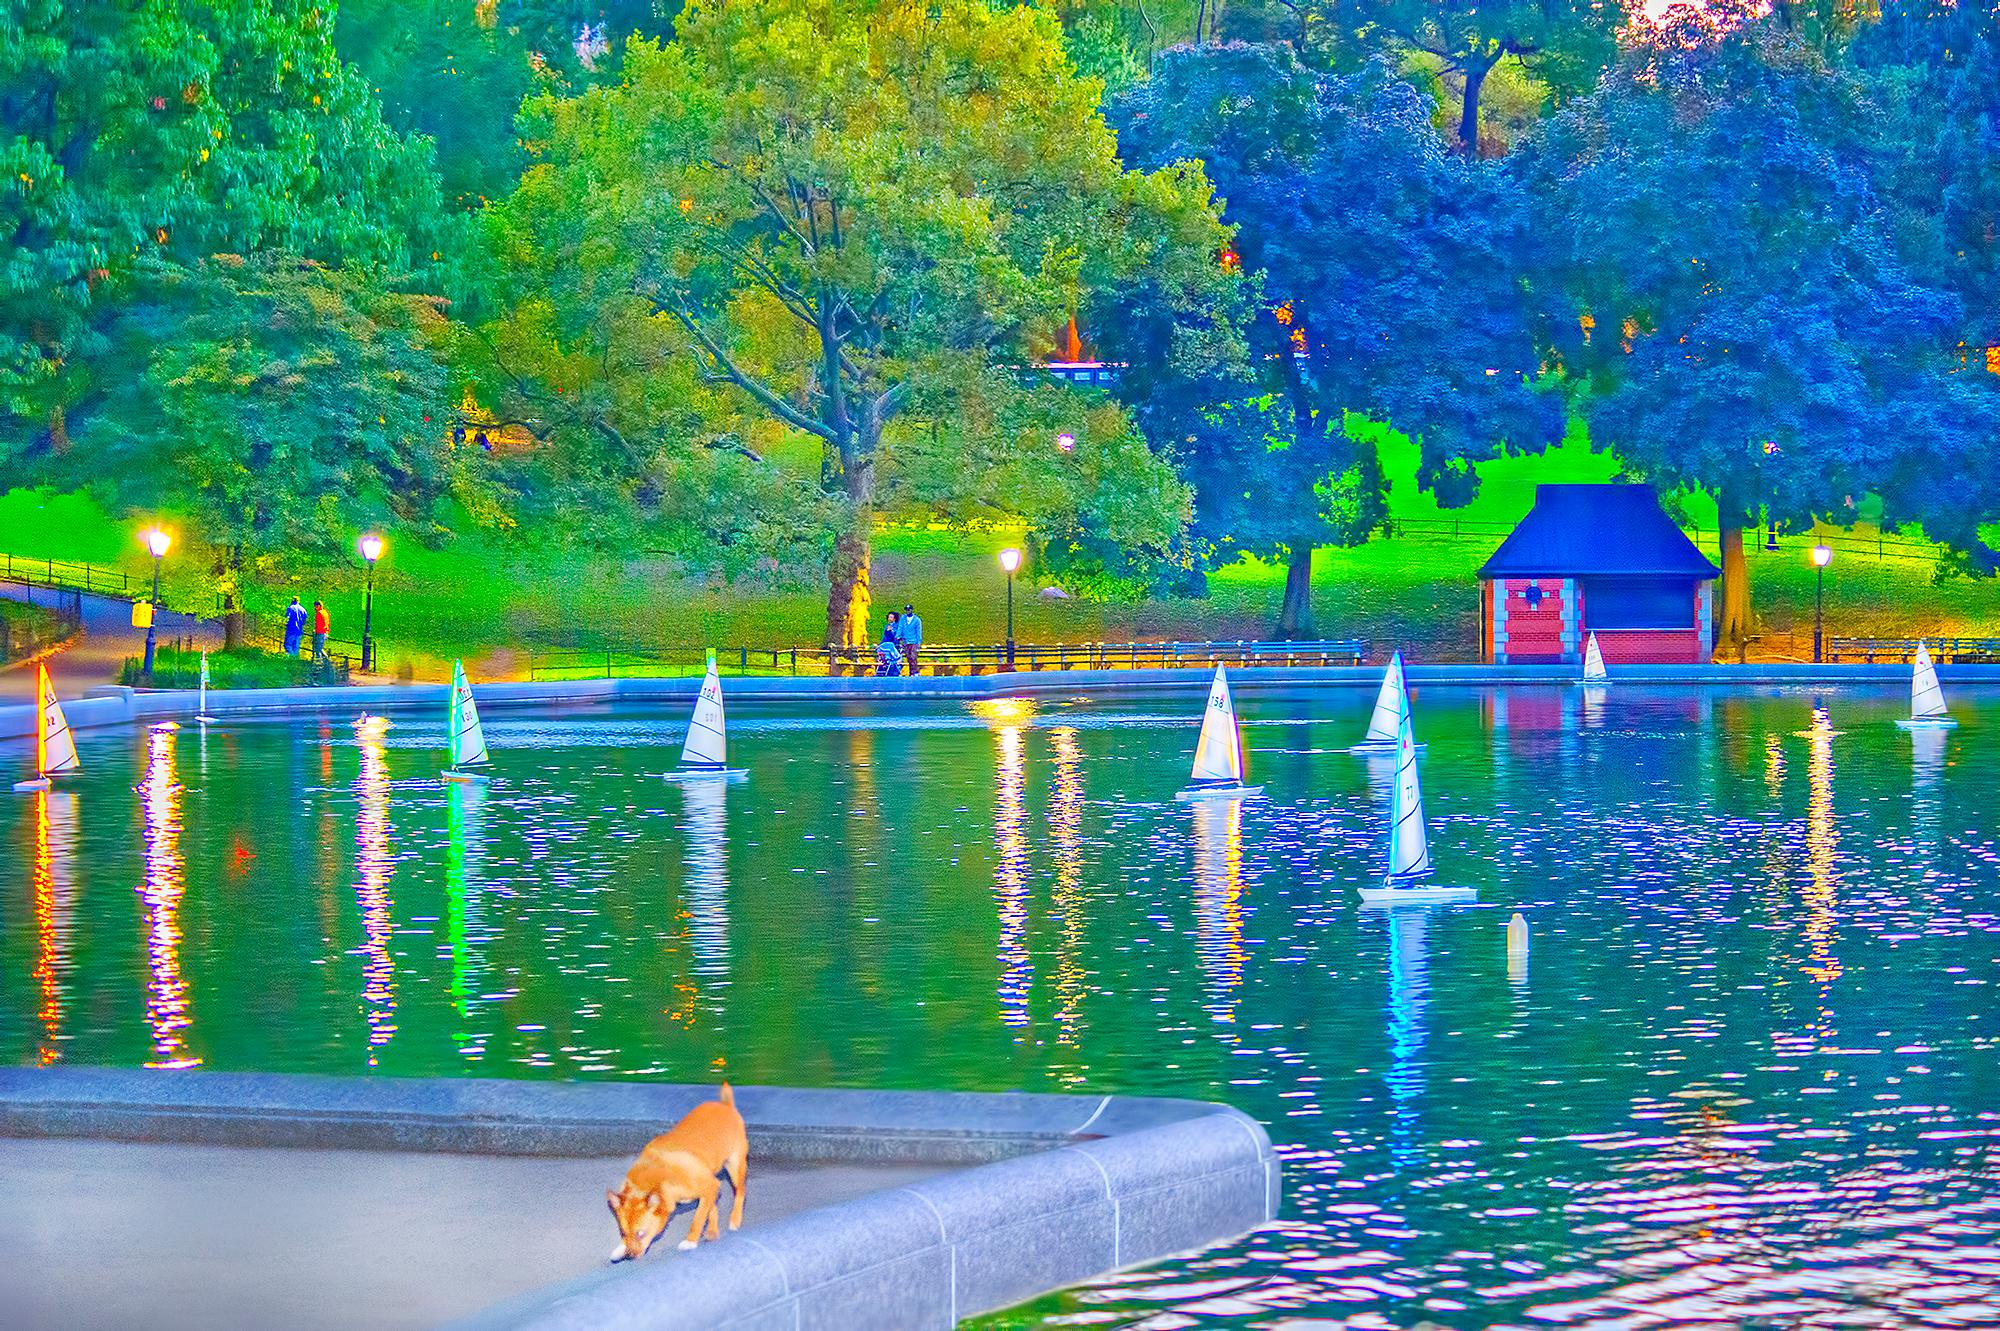 Mitchell Funk Color Photograph - Model Sailboats In Central Park Pond, New York City